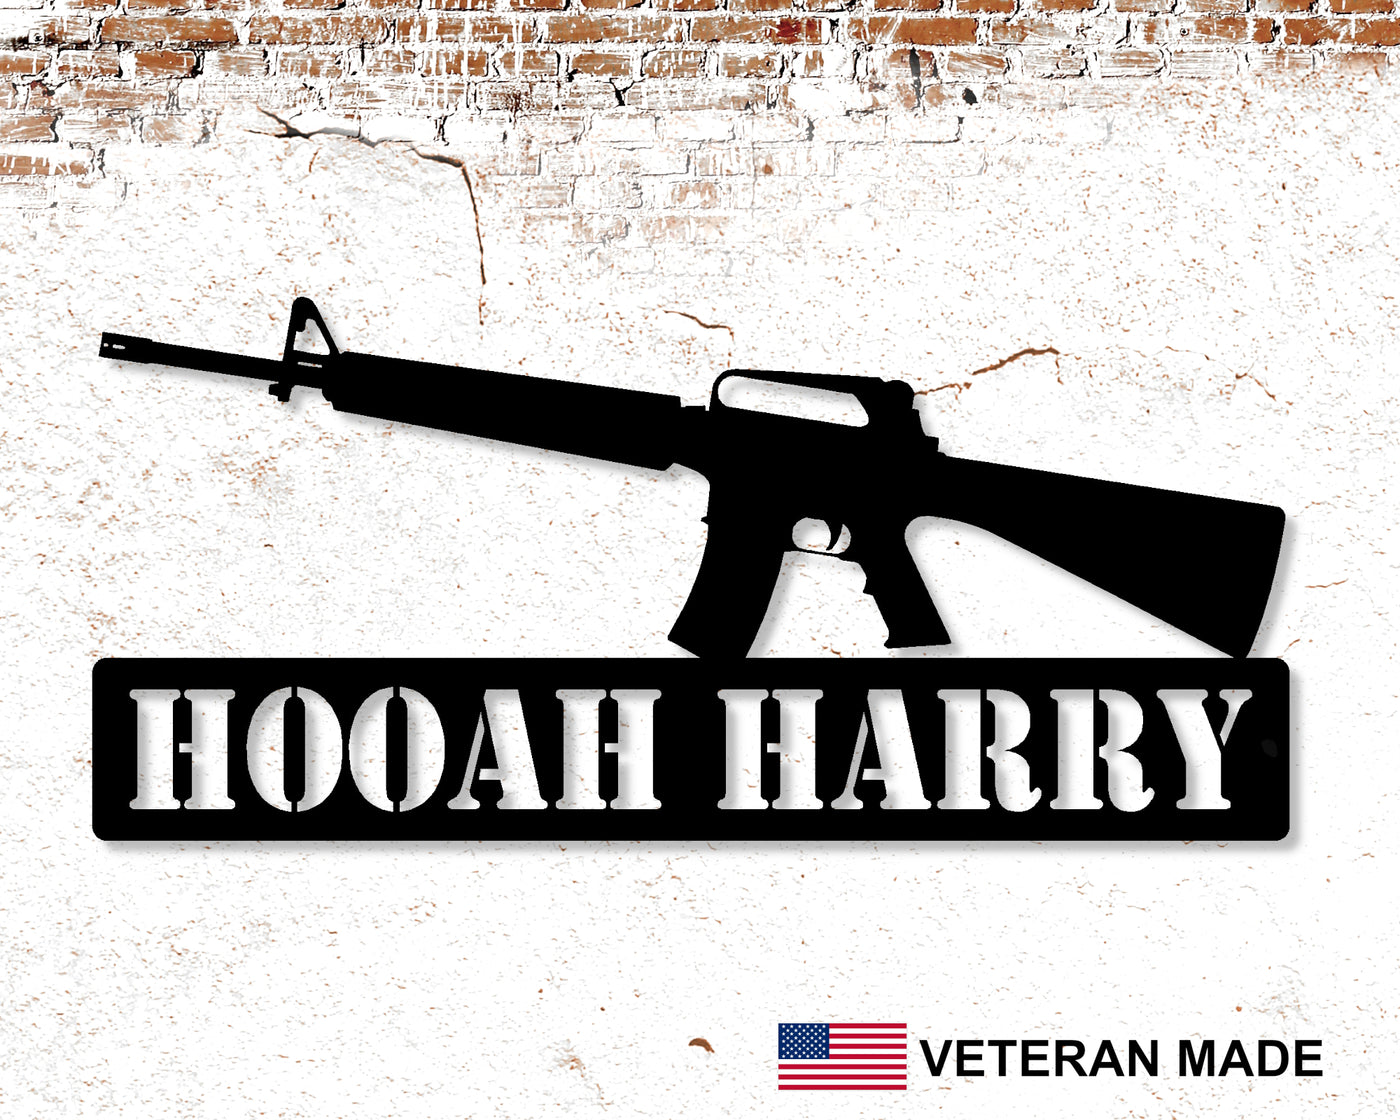 Personalized M16 Rifle Metal Sign - Madison Iron and Wood - Personalized sign - metal outdoor decor - Steel deocrations - american made products - veteran owned business products - fencing decorations - fencing supplies - custom wall decorations - personalized wall signs - steel - decorative post caps - steel post caps - metal post caps - brackets - structural brackets - home improvement - easter - easter decorations - easter gift - easter yard decor